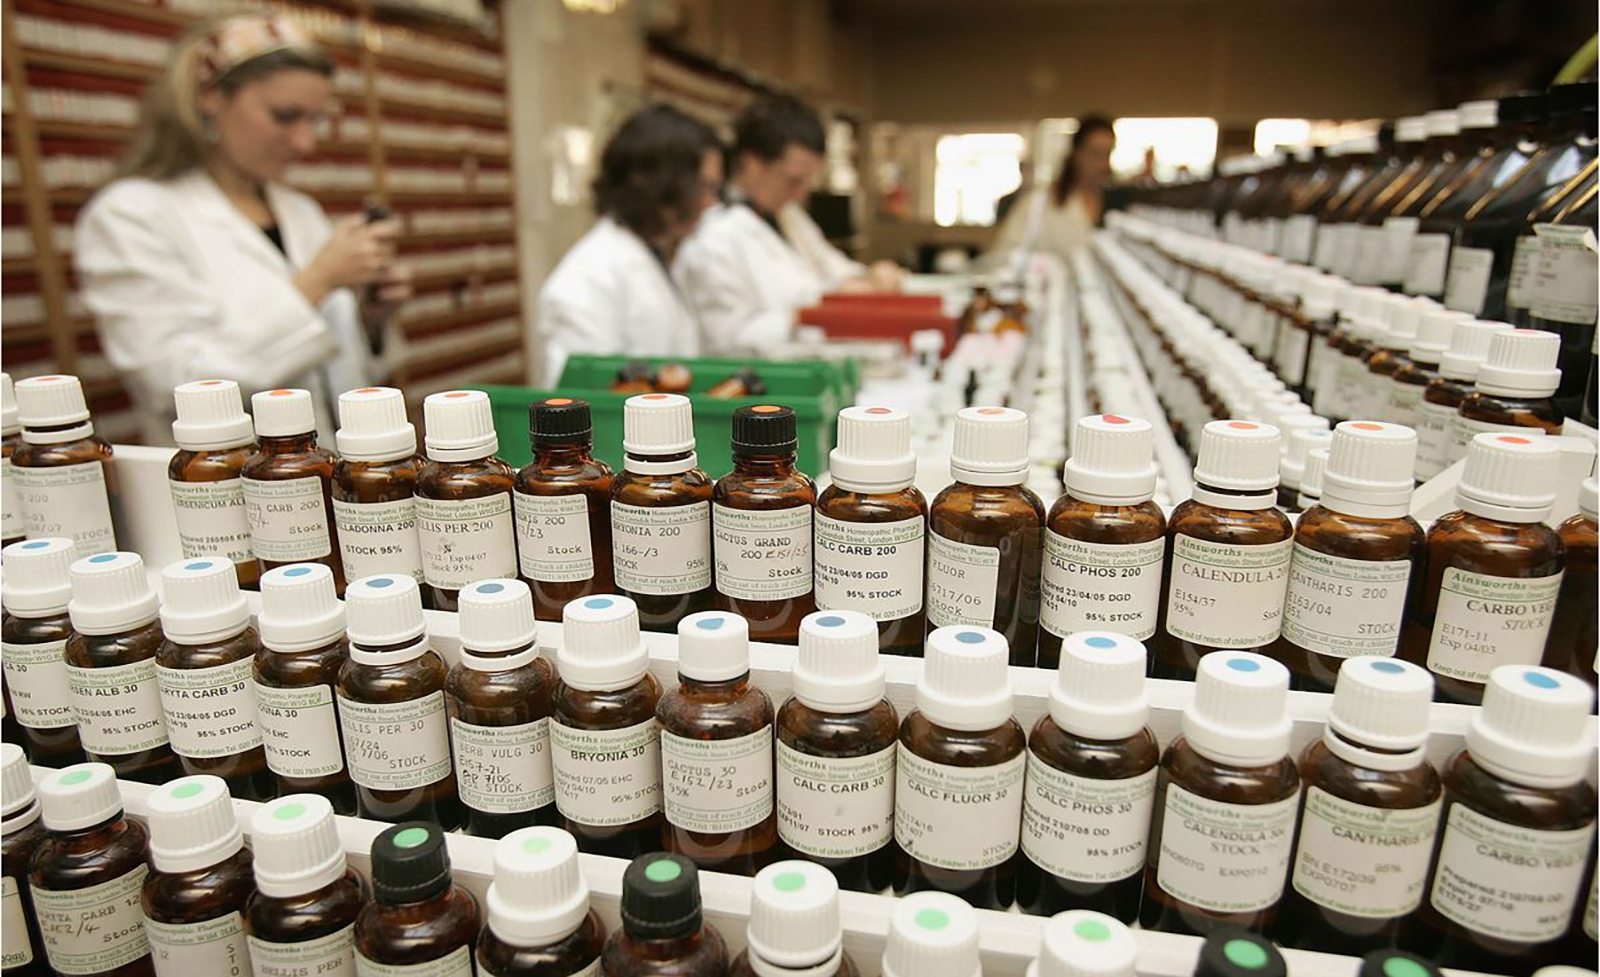 Rows of various homeopathic medicines